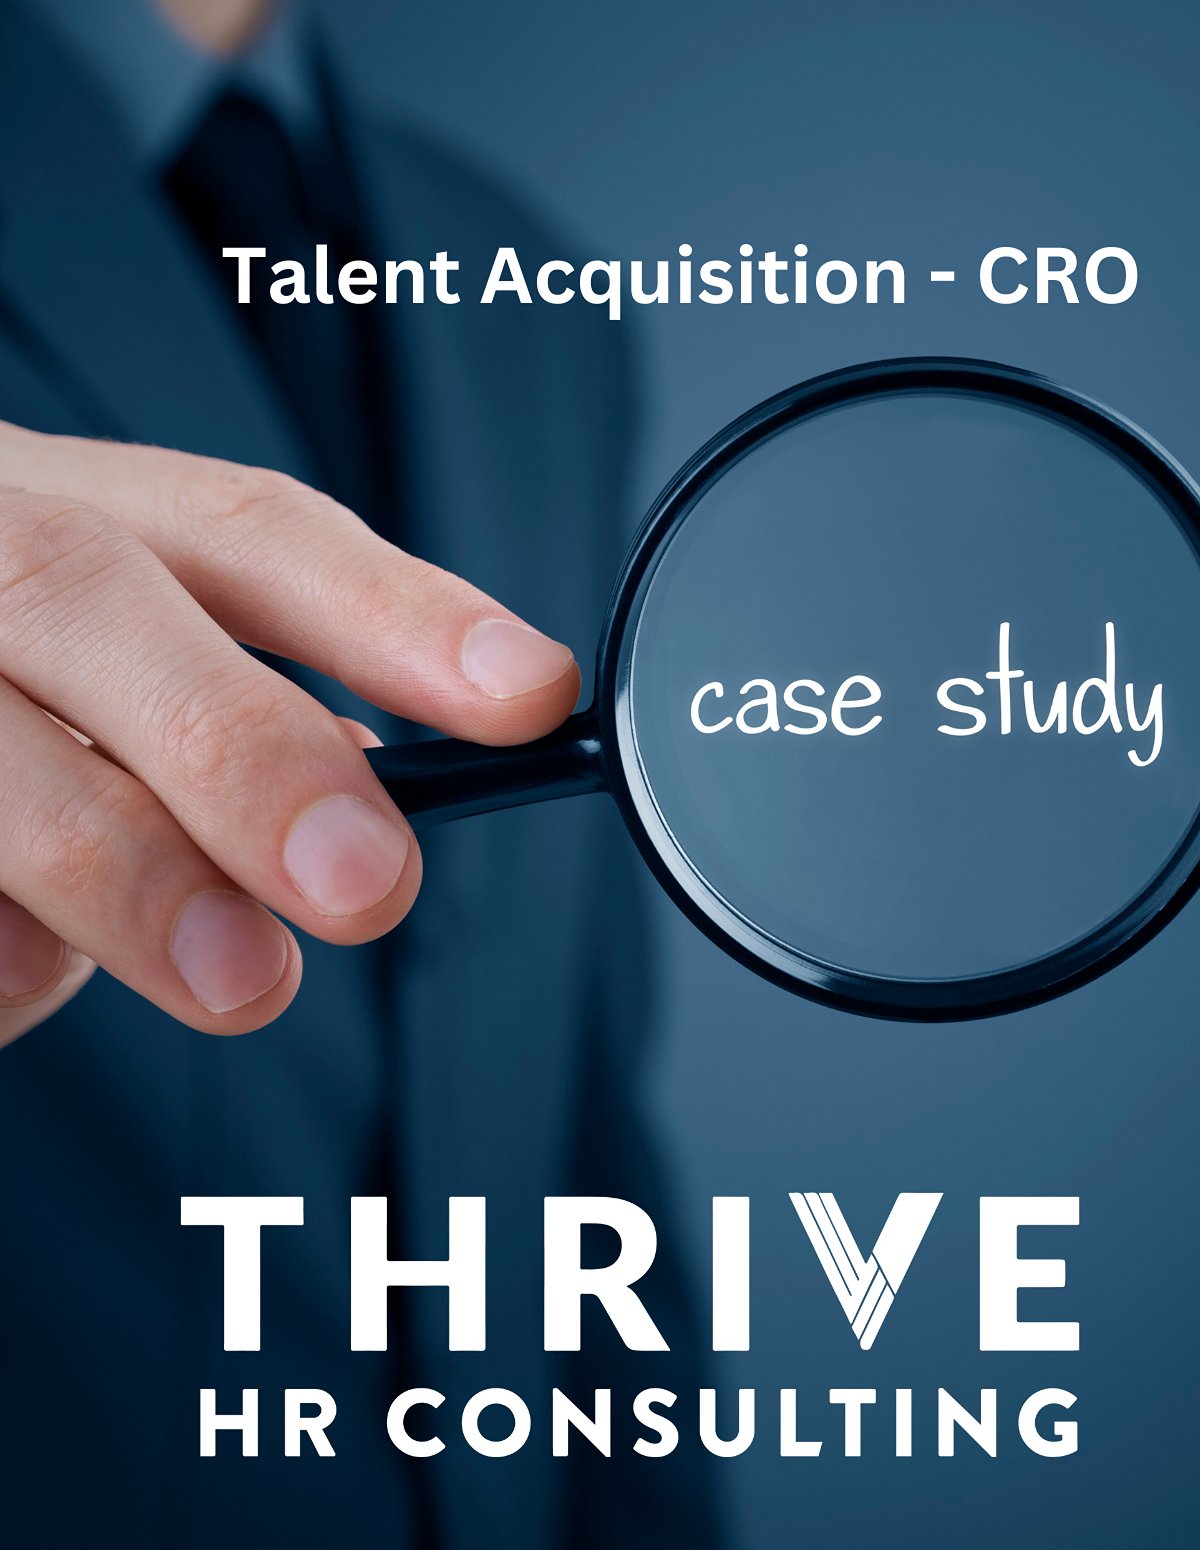 Thrive HR Consulting - CRO Case Study